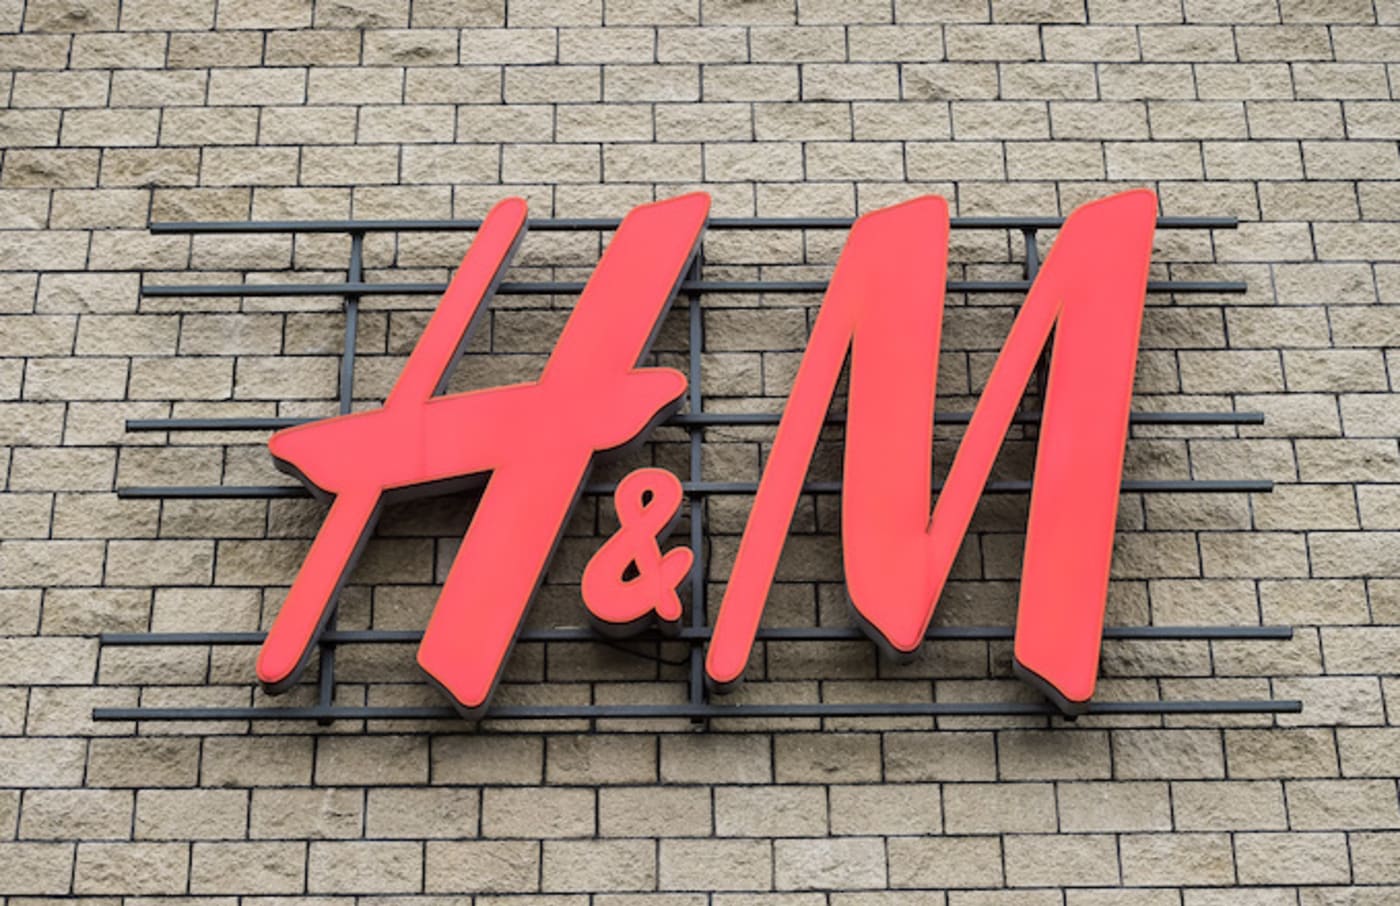 The H&M clothing store logo.